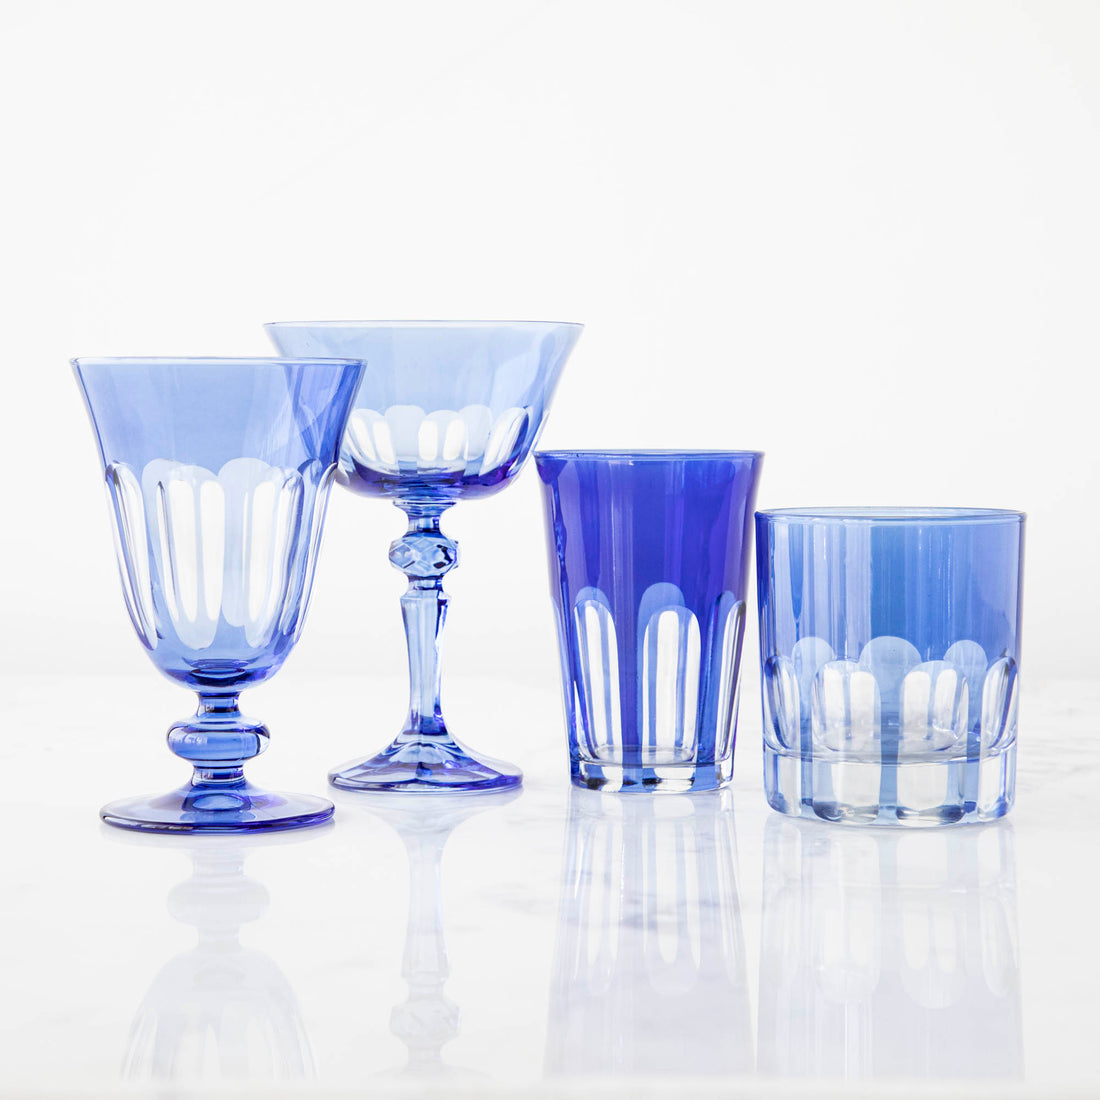 A set of blue Rialto Moon Glow Glasses by SIR/MADAM on a reflective surface.